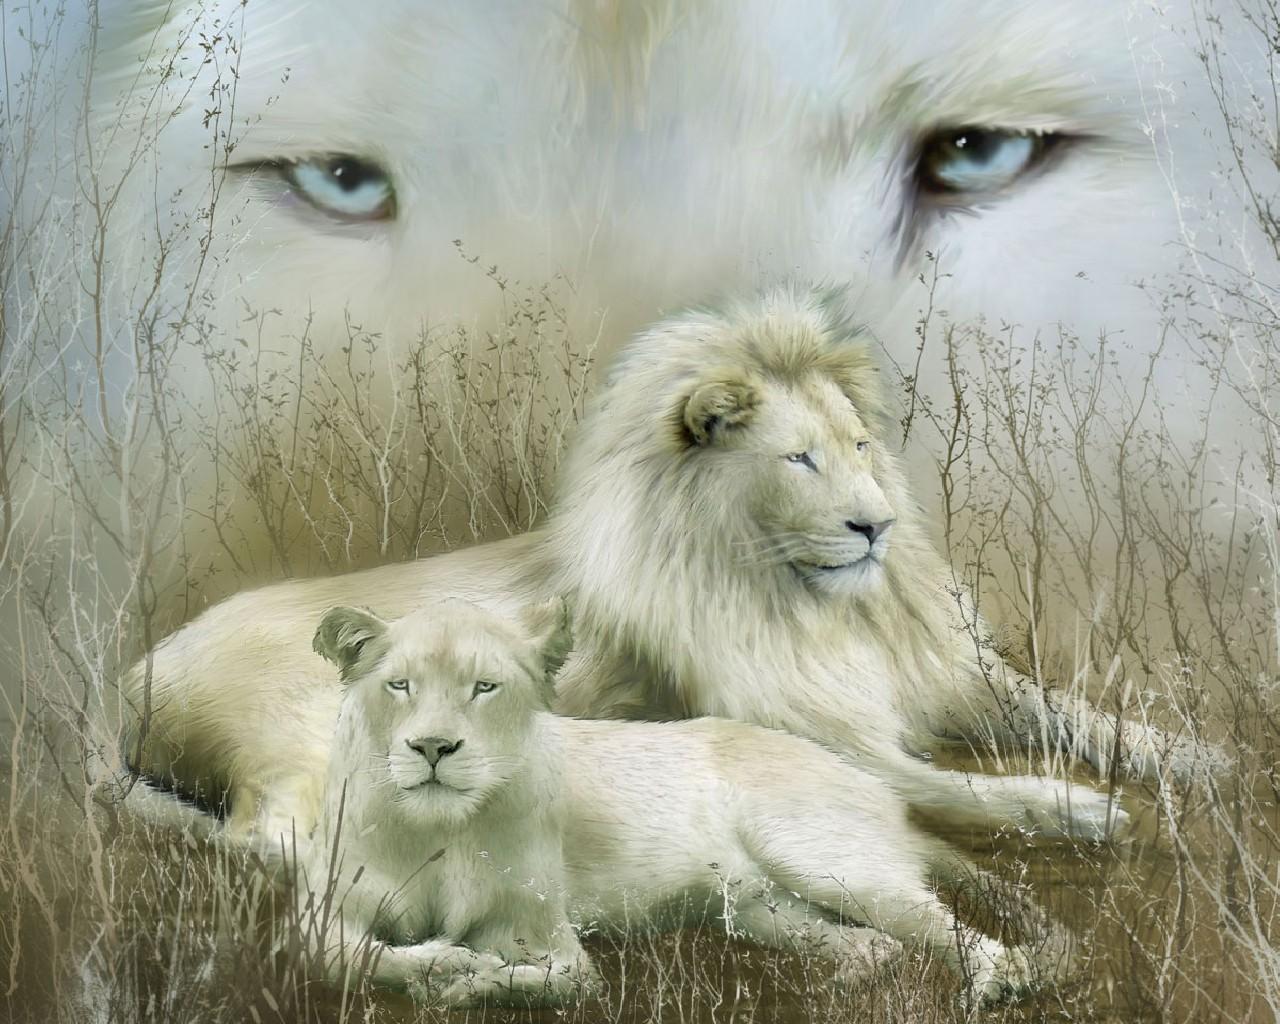 White Lions images White Lions wallpaper photos 32808019